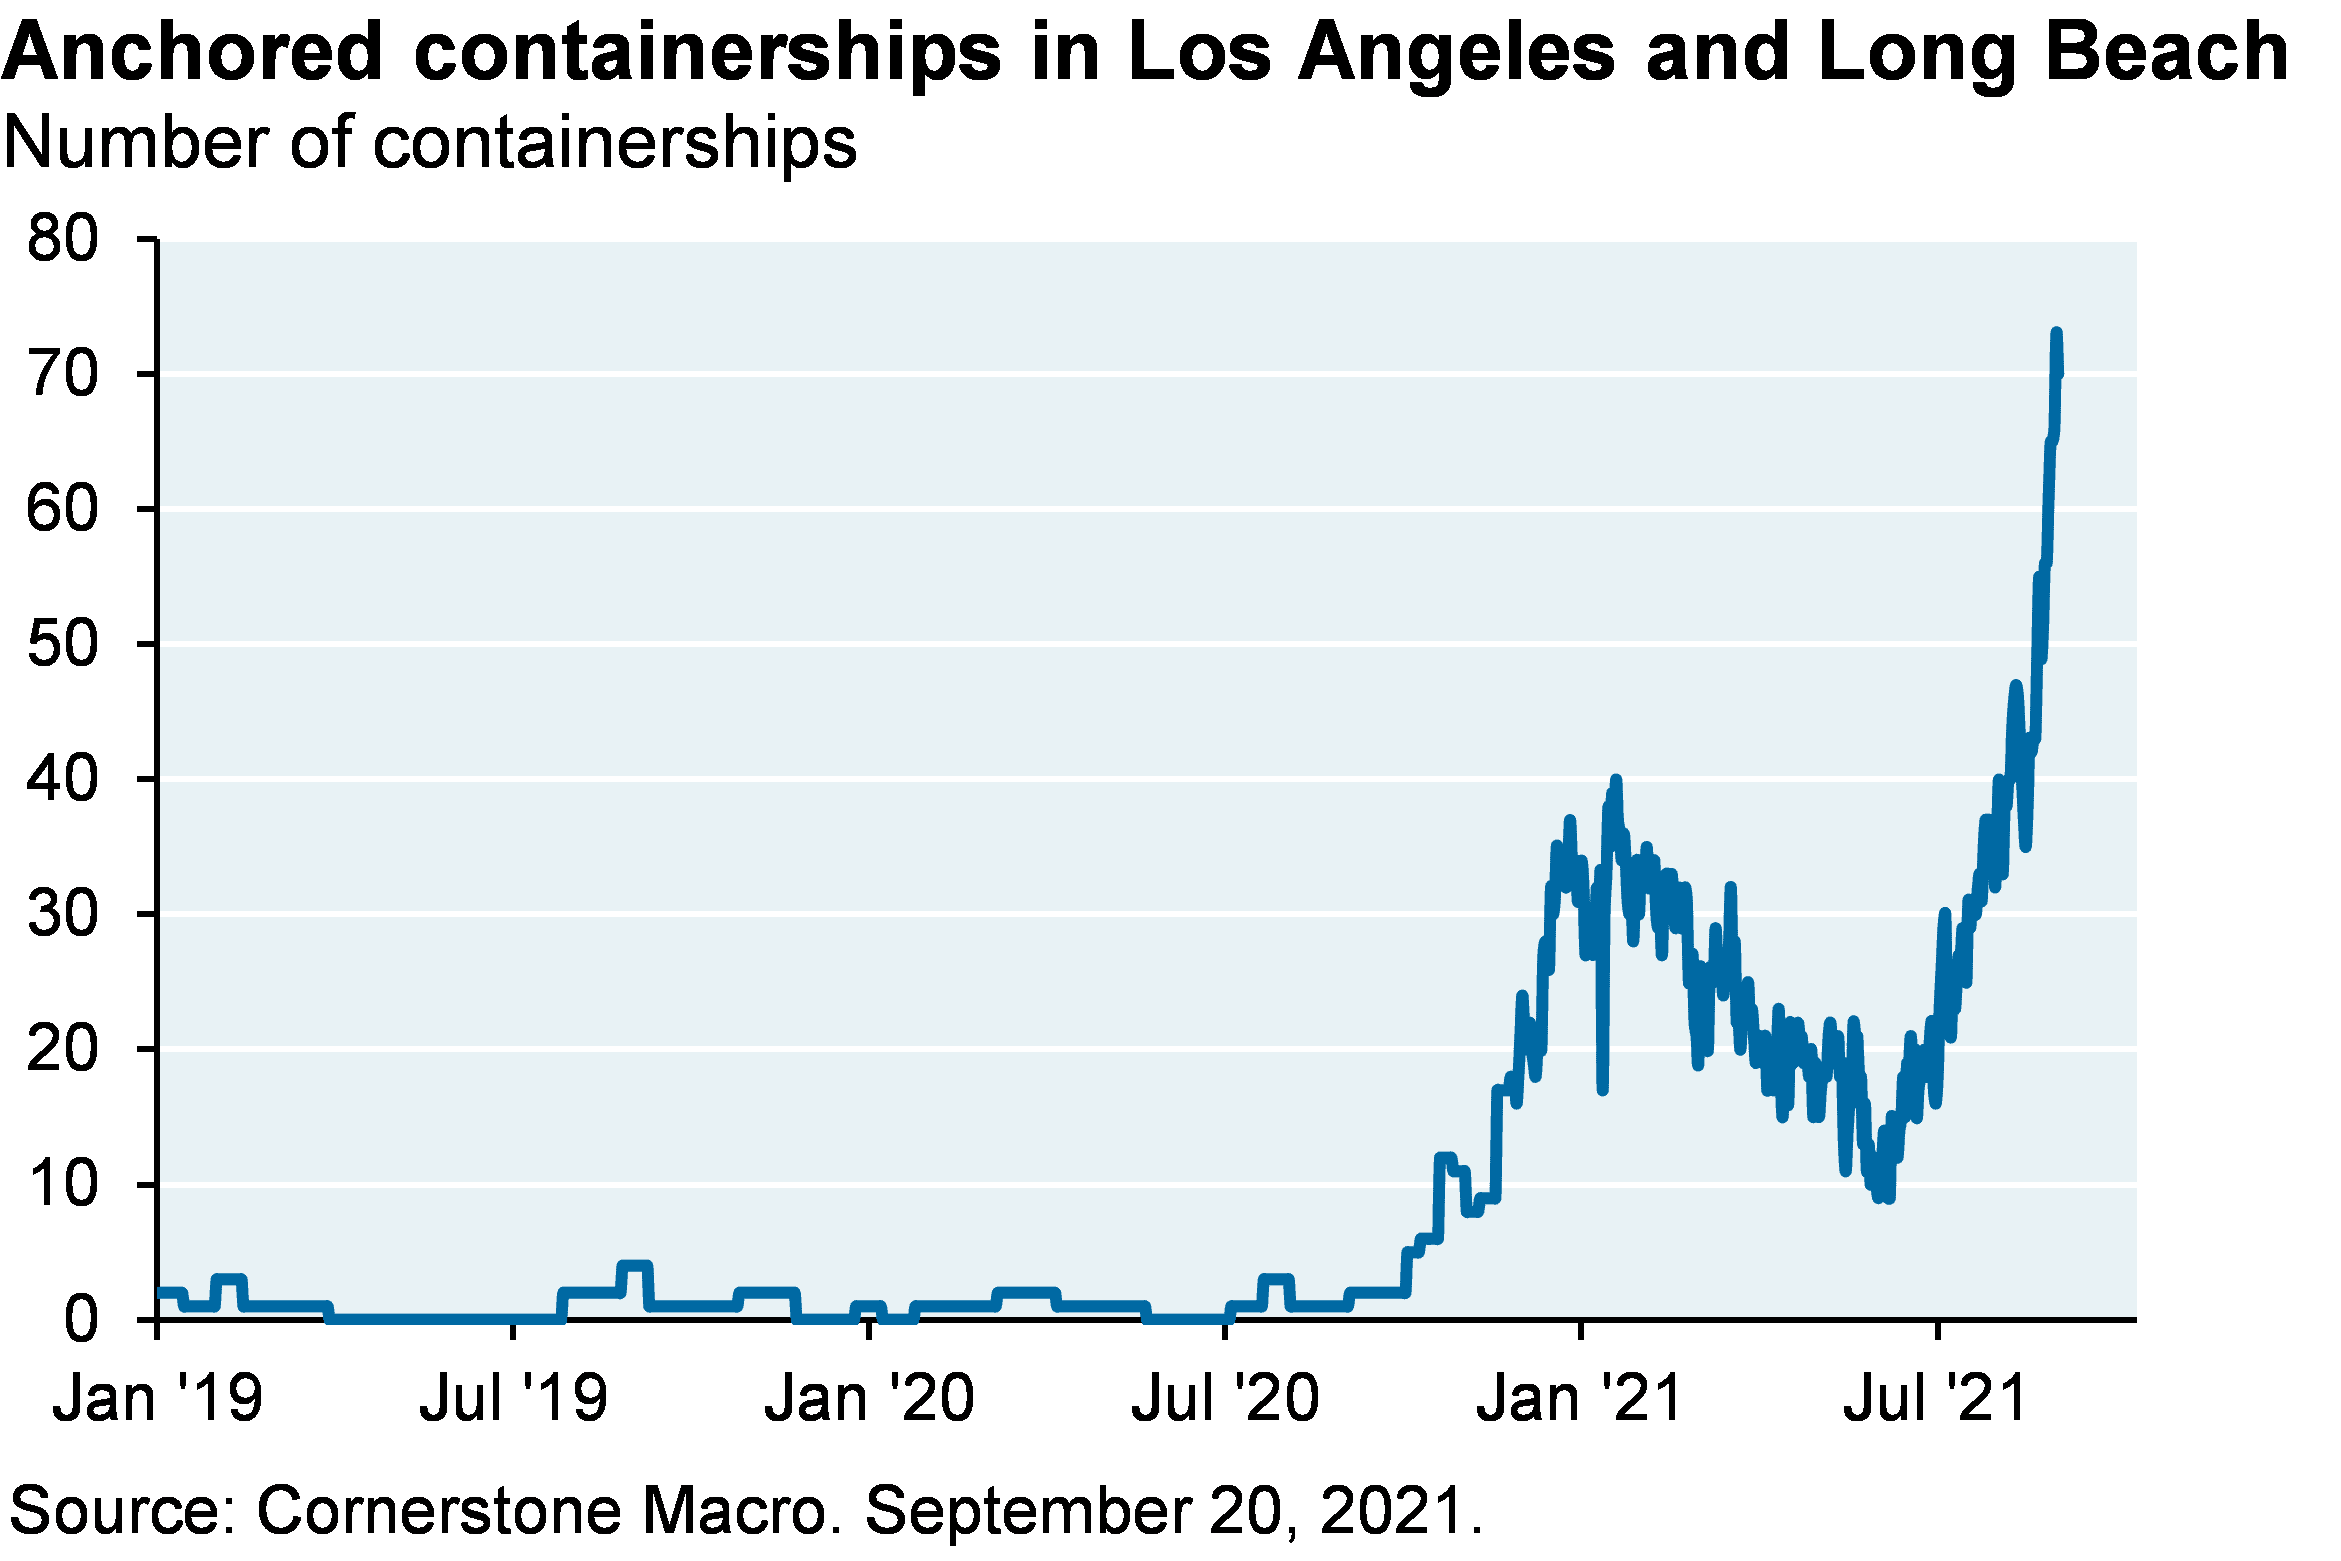 Anchored containerships in Los Angeles and Long Beach 2021.